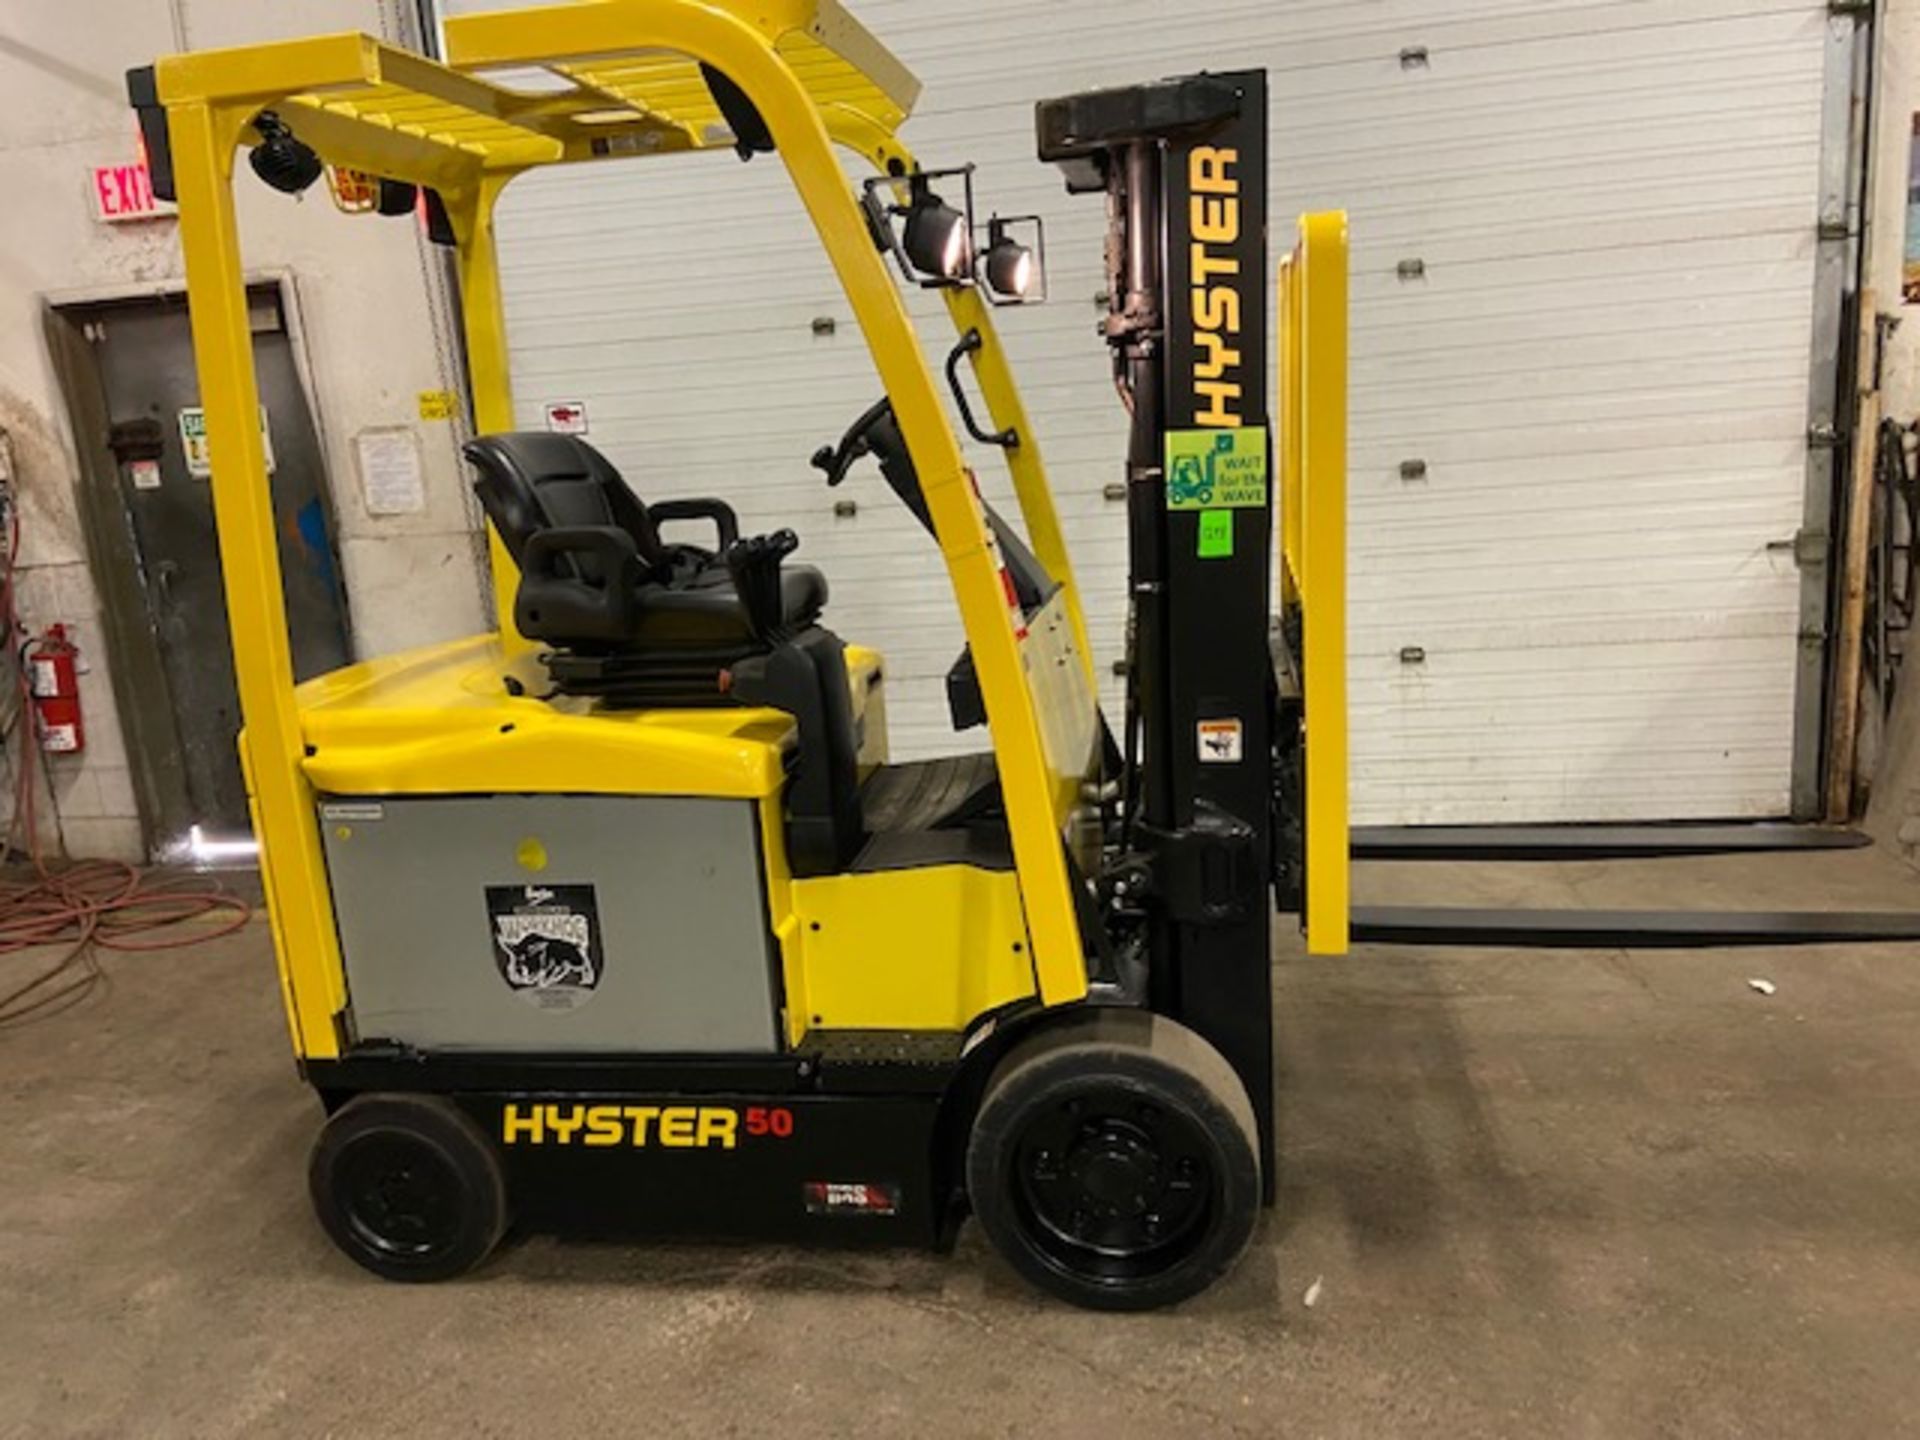 FREE CUSTOMS - 2012 Hyster 5000lbs Capacity Forklift Electric with 3-STAGE MAST with sideshift and